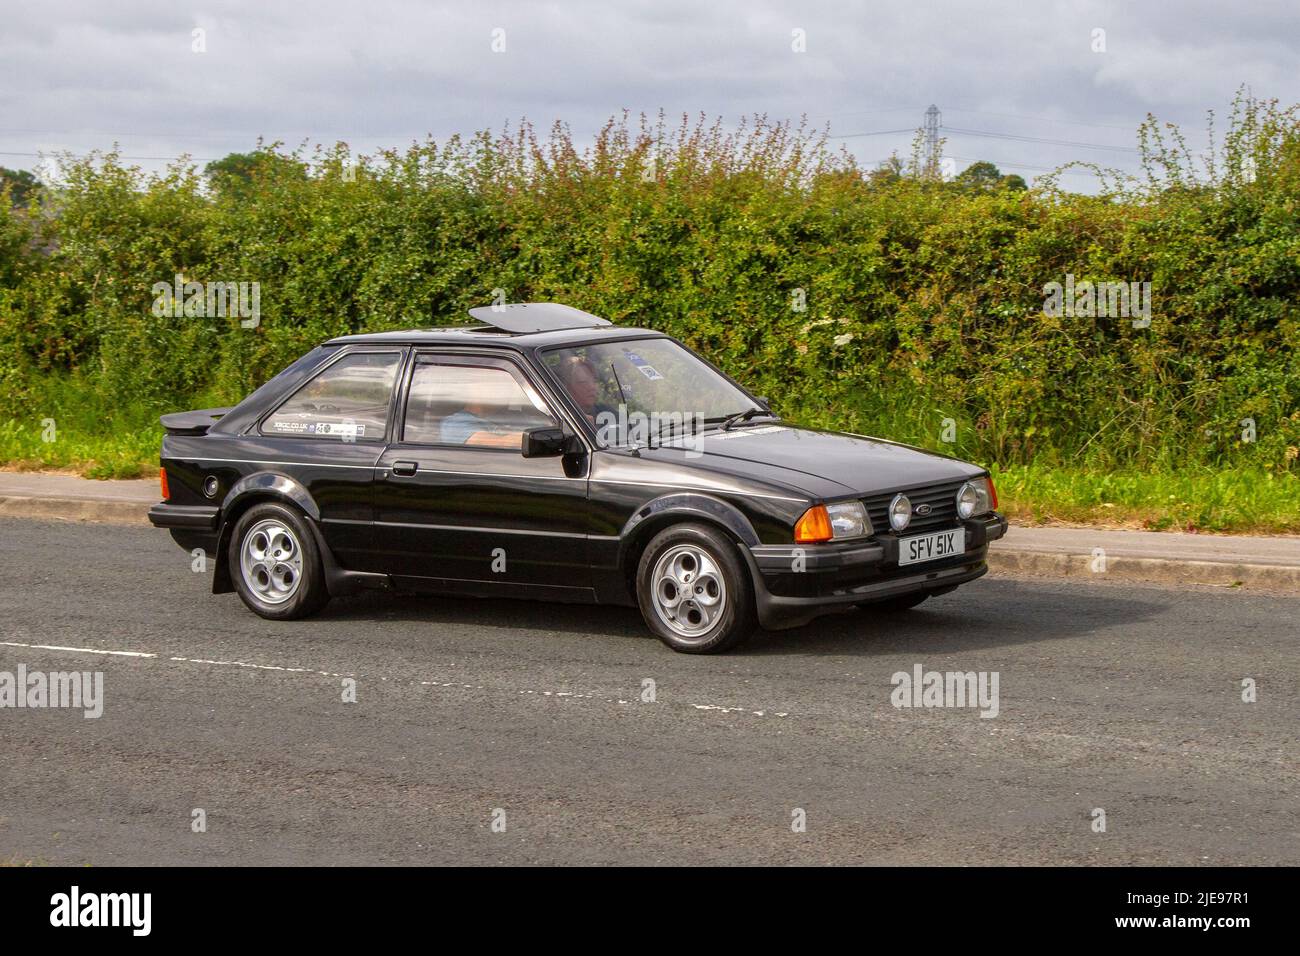 1982 80s, eighties Ford Escort Xr3 black petrol Hatchback; Antique classic cars, motorcycles, light trucks, ex-army vehicles, and vintage 4x4s are arriving at Hoghton Tower for the Supercar Summer Showtime car meet which is organised by Great British Motor Shows. Stock Photo